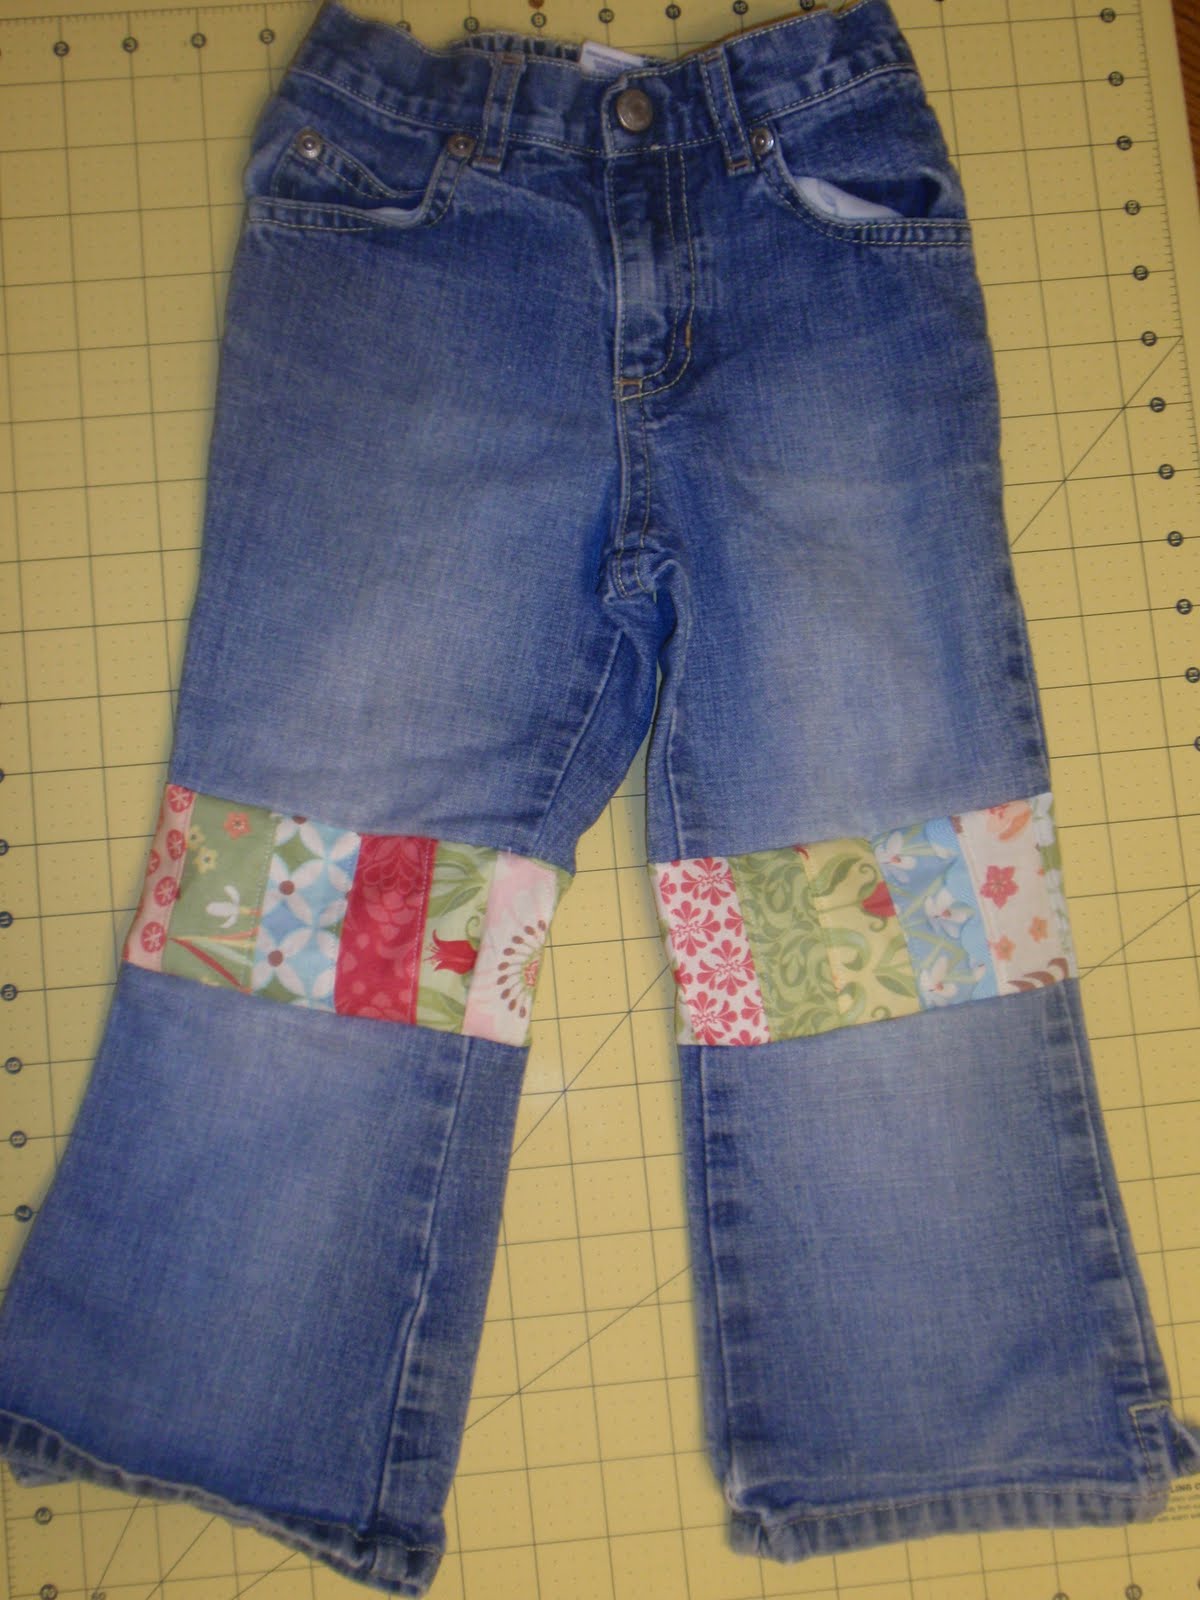 Diary of a Crafty Lady: Patching up some Holey Jeans